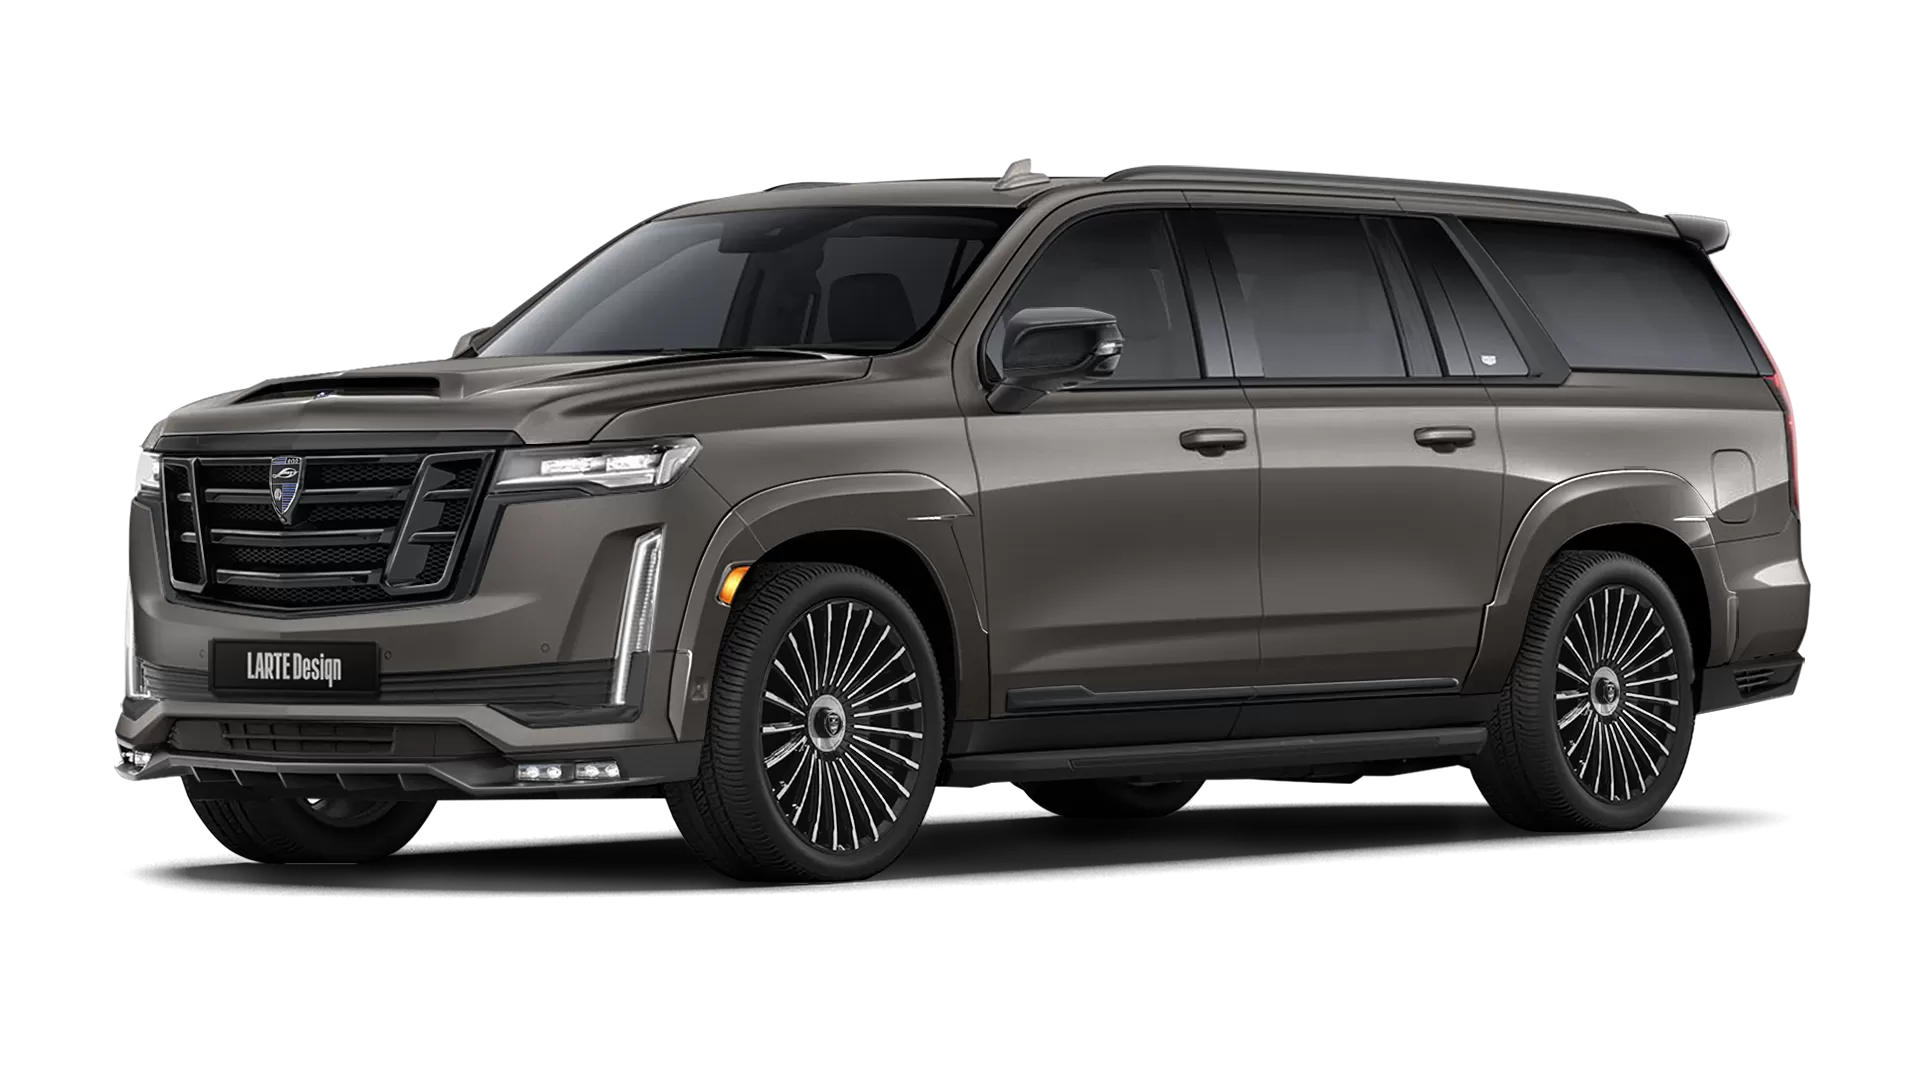 Cadillac Escalade ESV GMT 1XX with painted body kit: front view shown in Dark Mocha Metallic